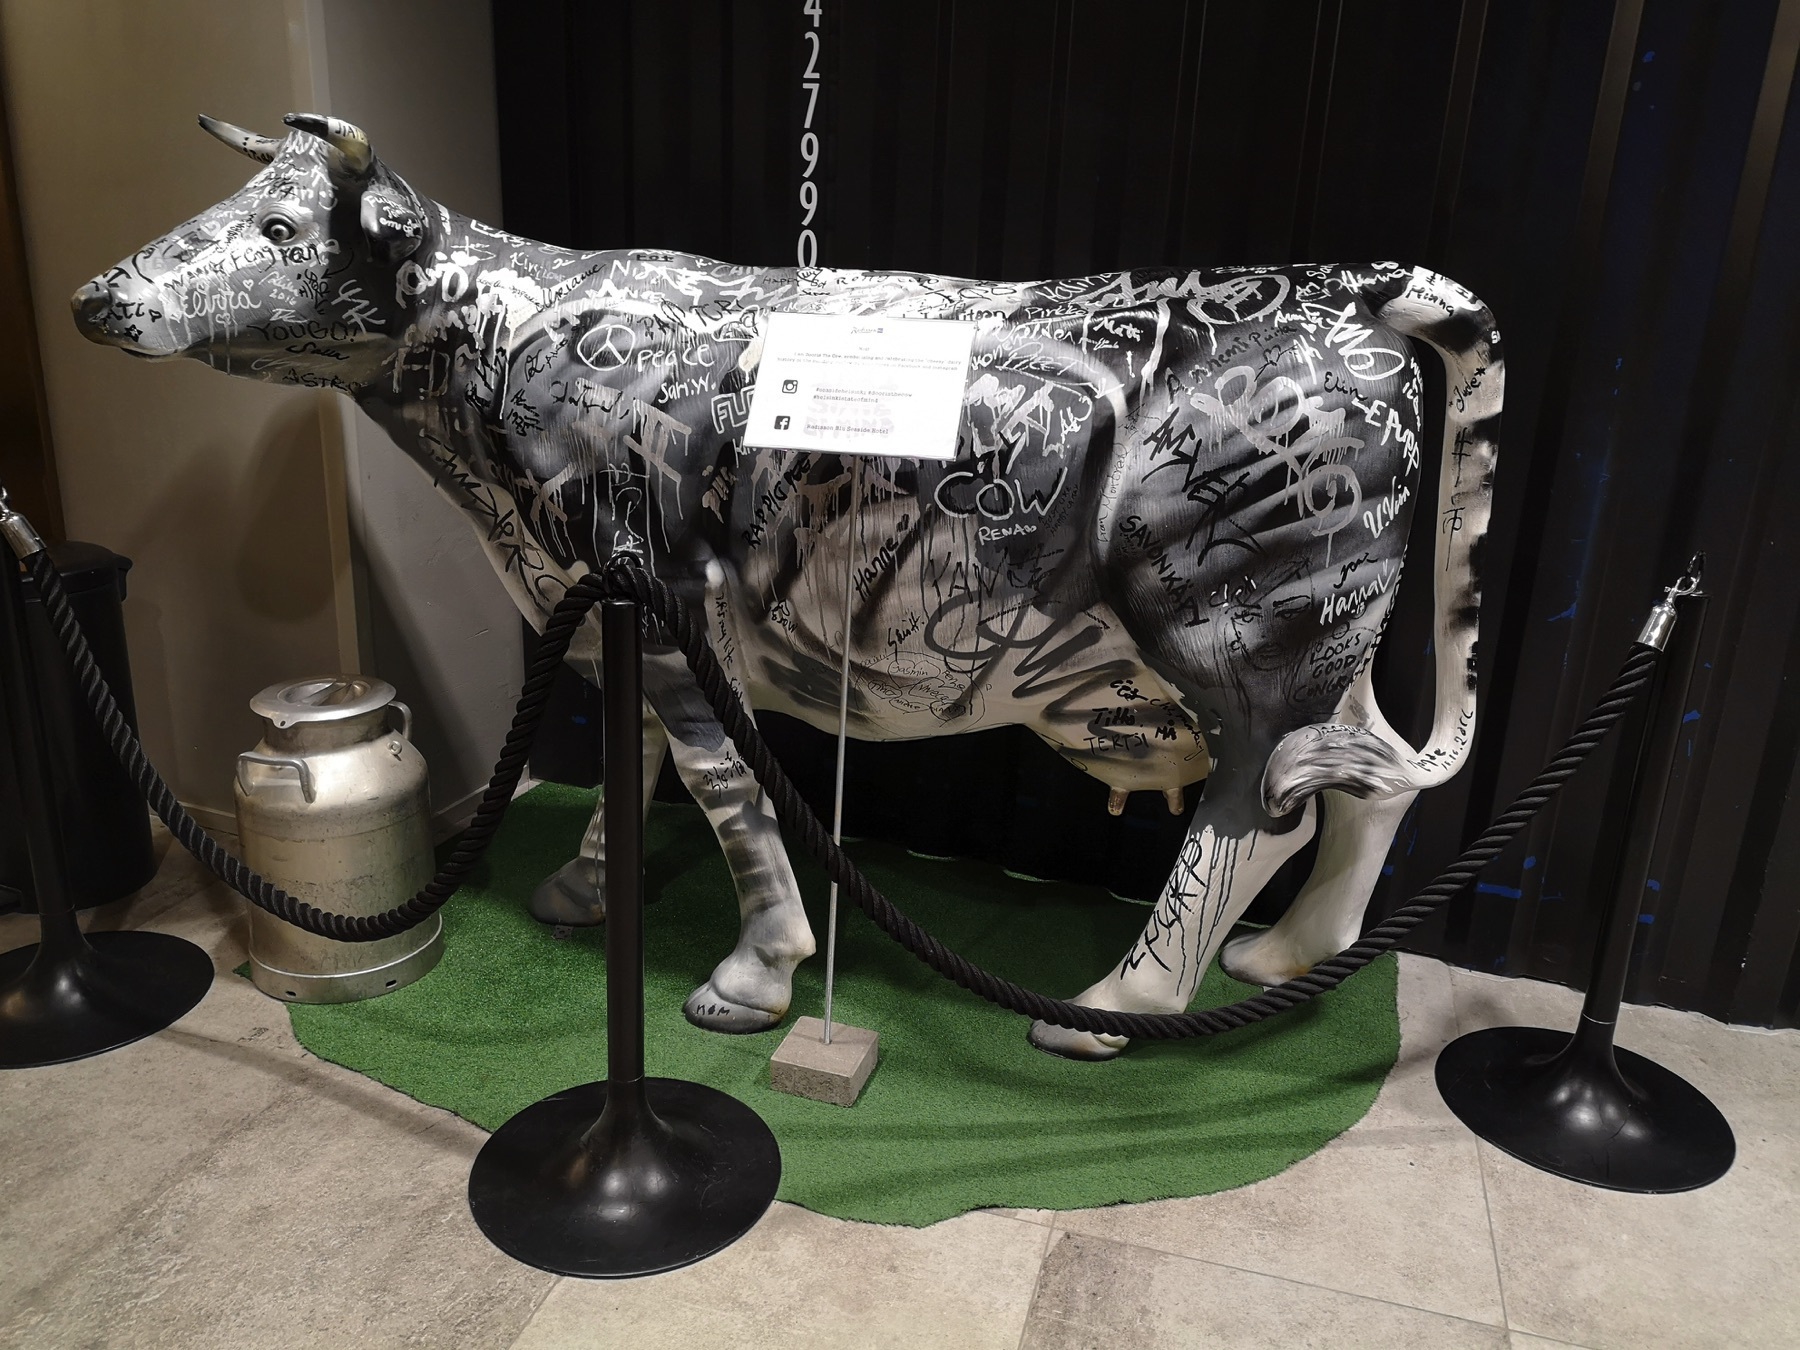 totally unrelated statue of a cow with graffiti